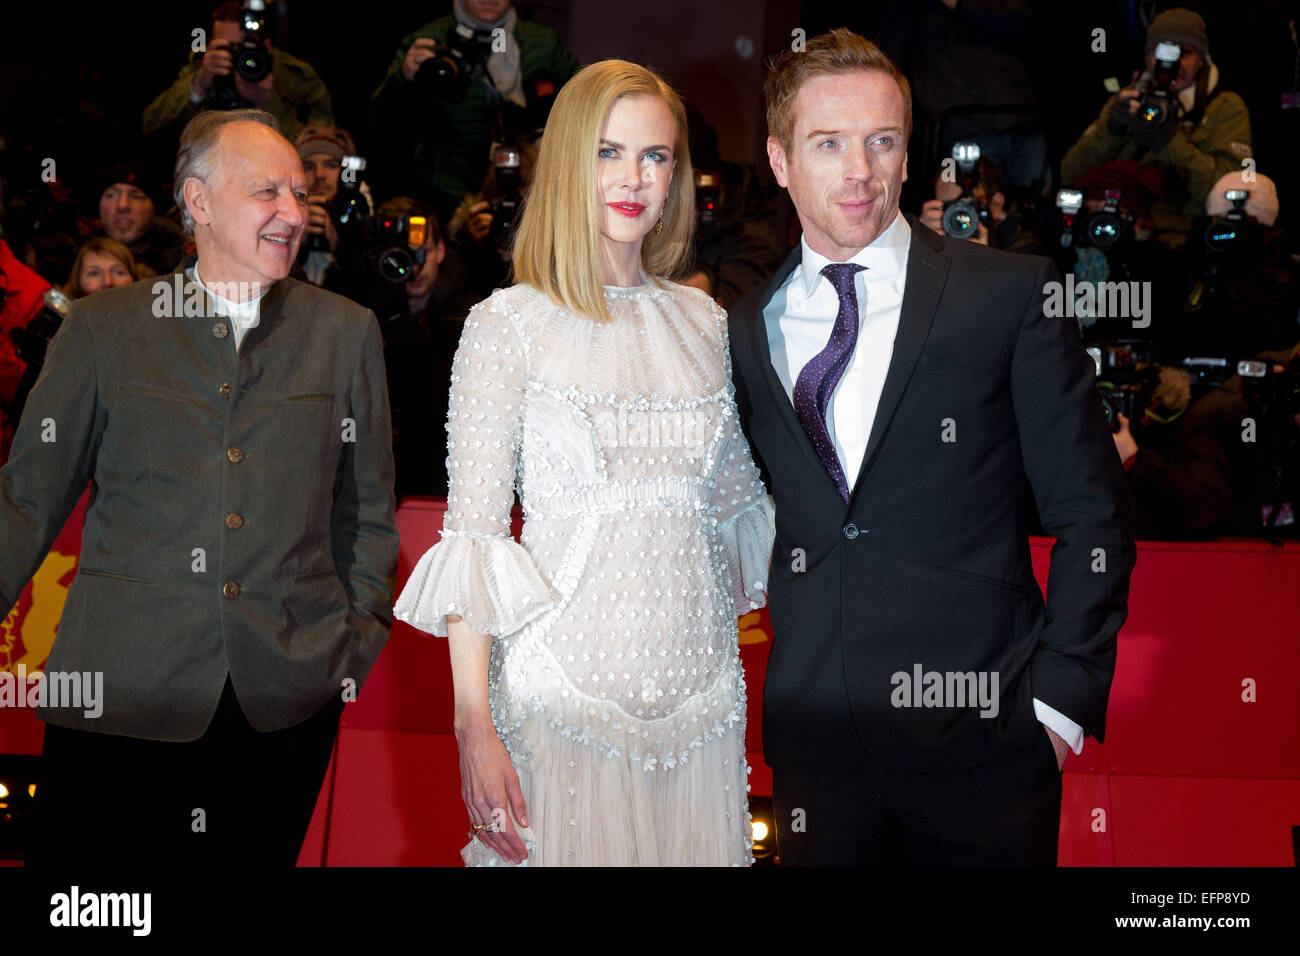 Director Werner Herzog (L-R), Australian actress Nicole Kidman and British actor Damian Lewis attend the premiere of the movie 'Queen Of The Desert' during the 65th International Berlin Film Festival, Berlinale, in Berlin, Germany, on 06 February 2015. Photo: Hubert Boesl/dpa /dpa - NO WIRE SERVICE - Stock Photo